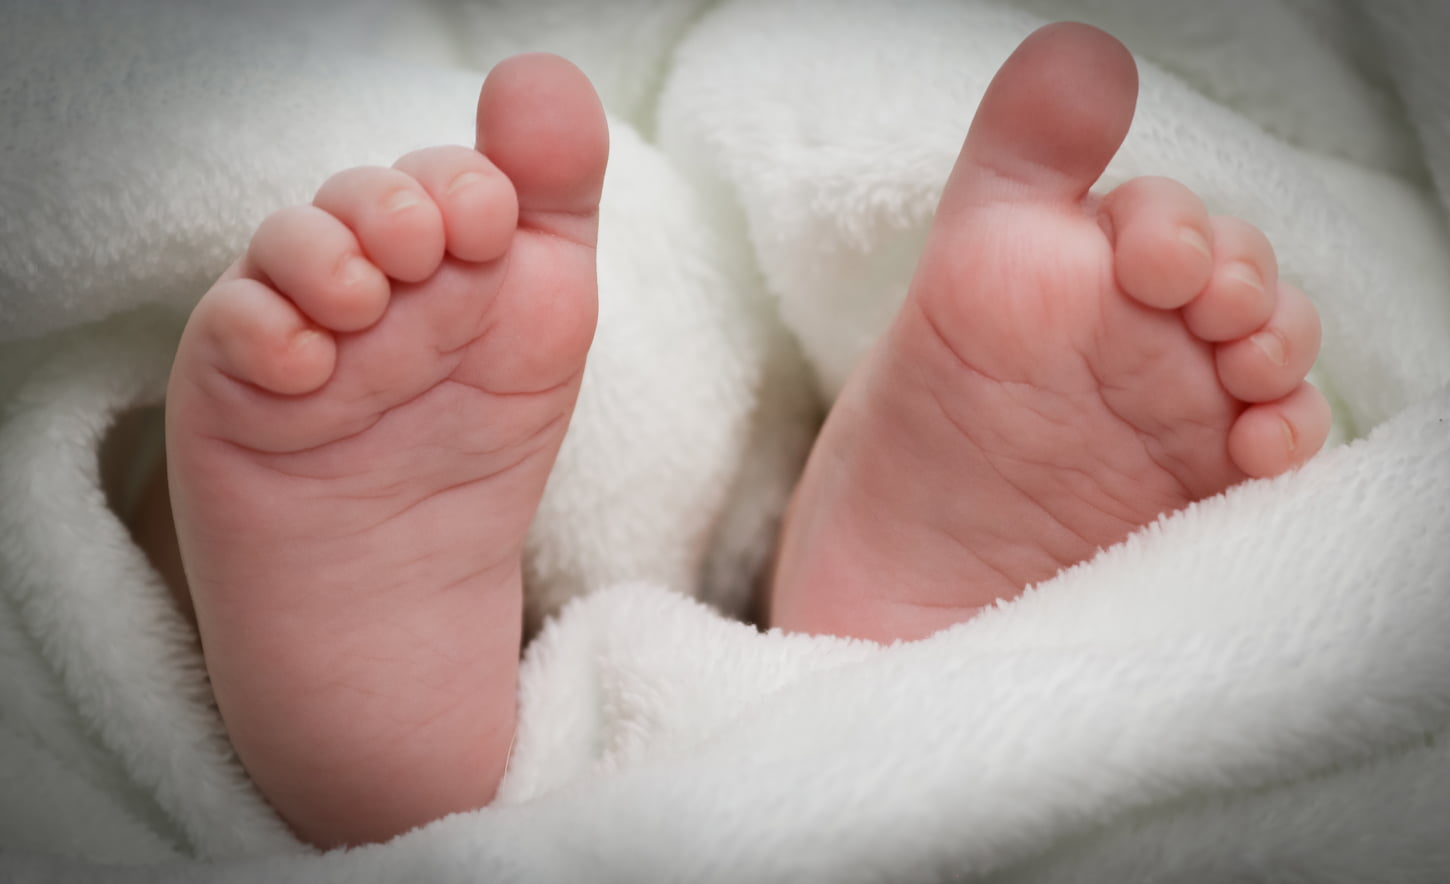 An image of the Small feet of a newborn baby sticking out of a white fleece blanket.